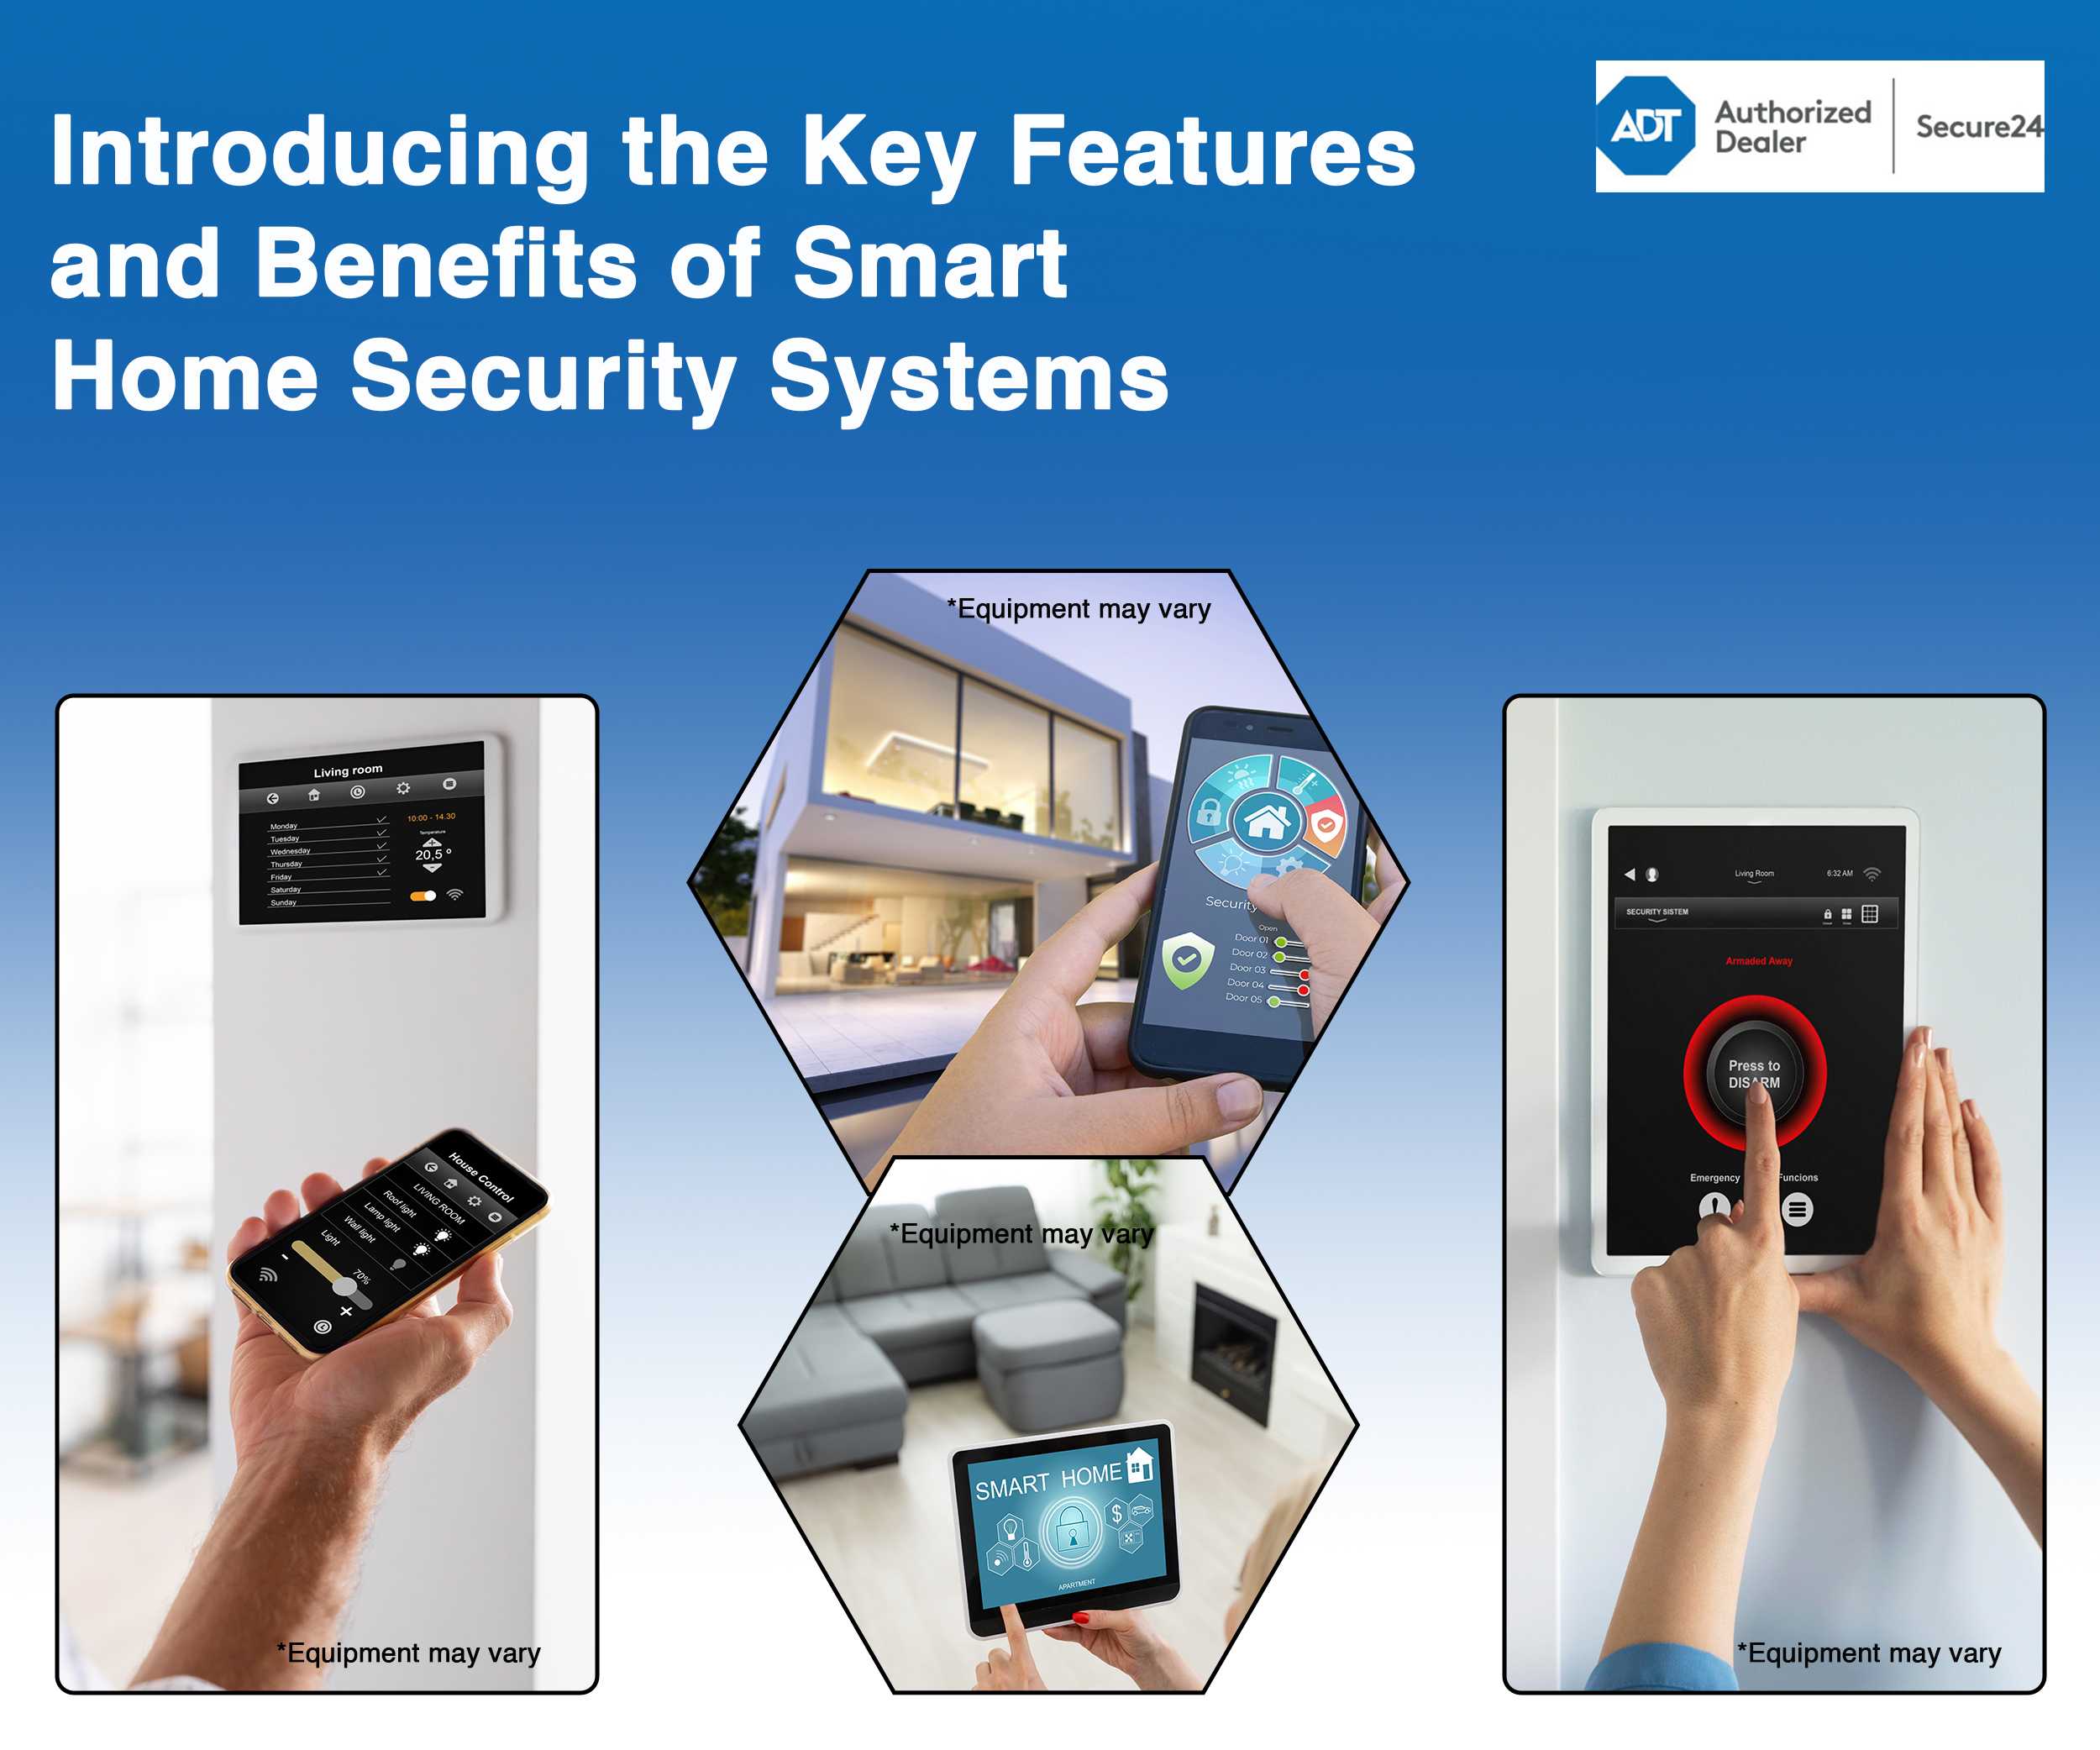 Key Features and Benefits of Smart Home Security Systems